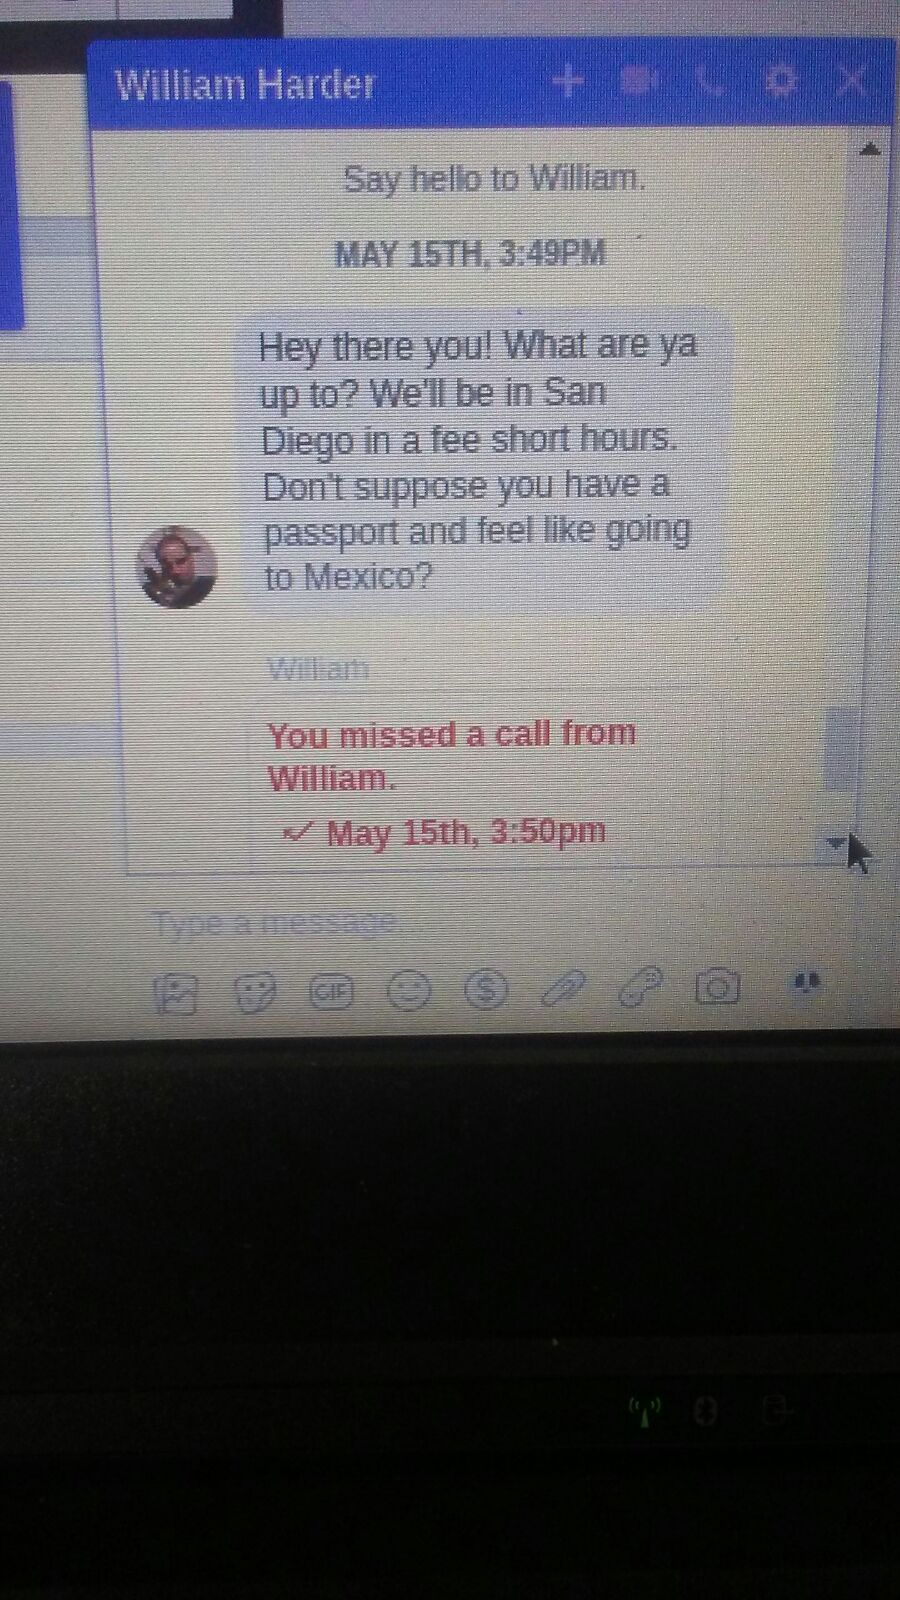 William Harders threatening messages on facebook